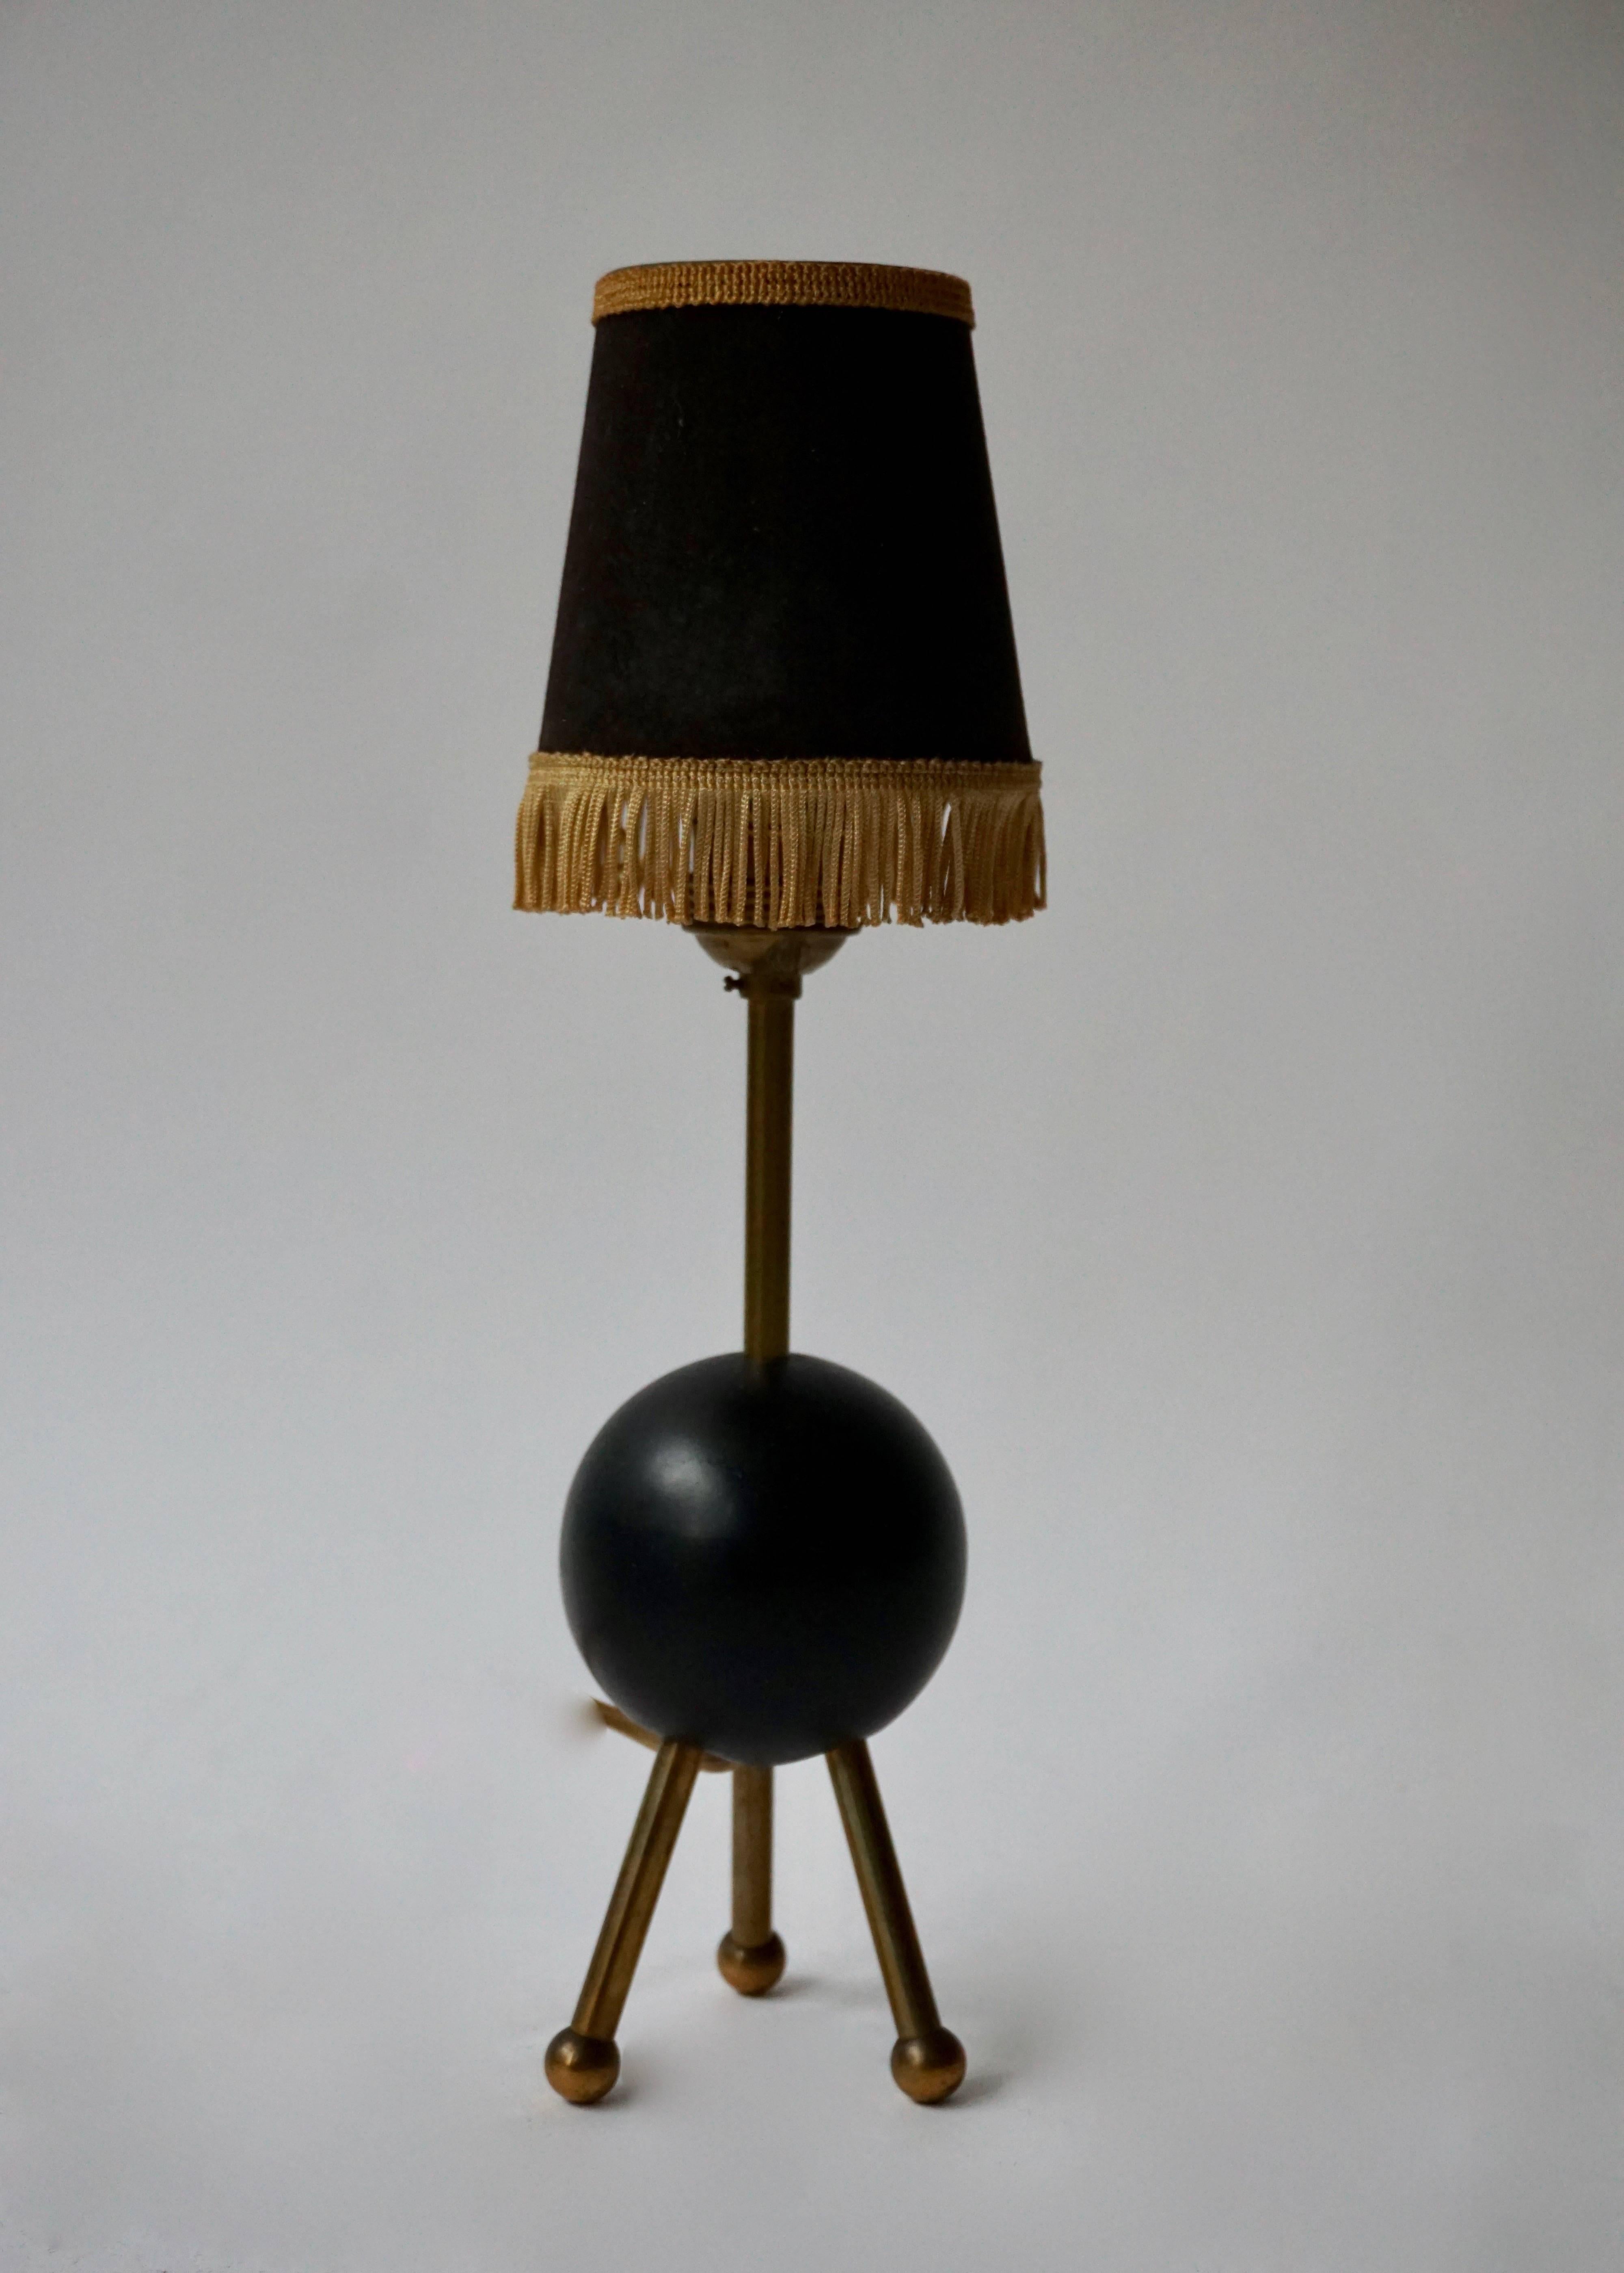 Italian 1950s brass table lamp.
Height with shade:38 cm.
Height without shade:28 cm.
Diameter bace 9 cm.

Shade is not included in the price.